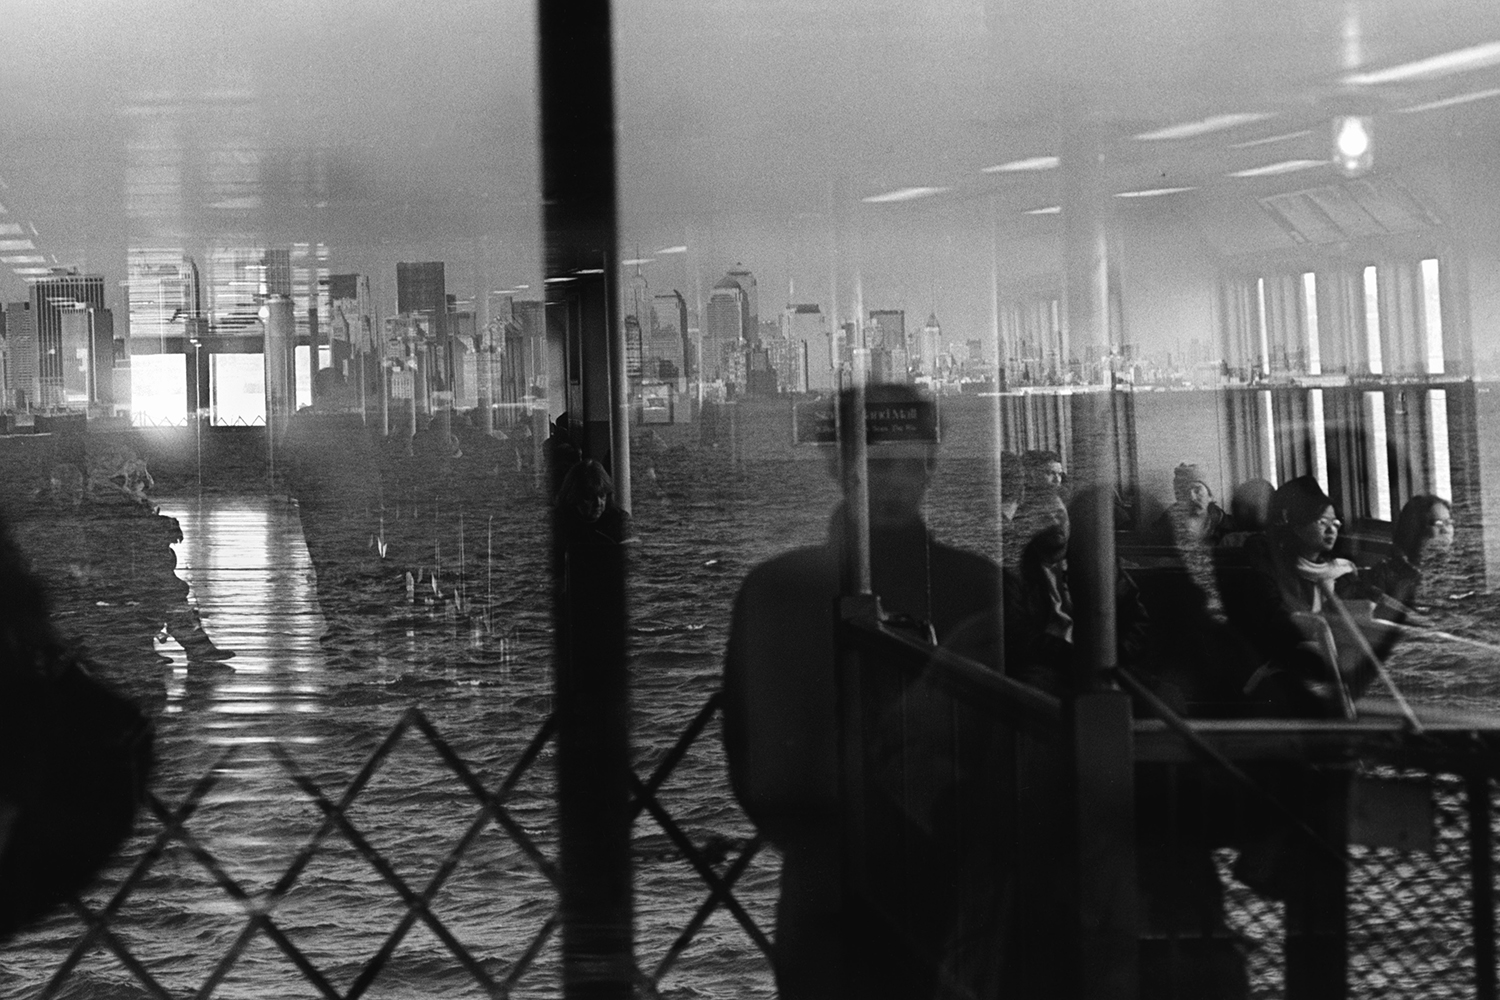   Reflection in a&nbsp;window of the Staten Island ferry  New York, NY. &nbsp;2002 